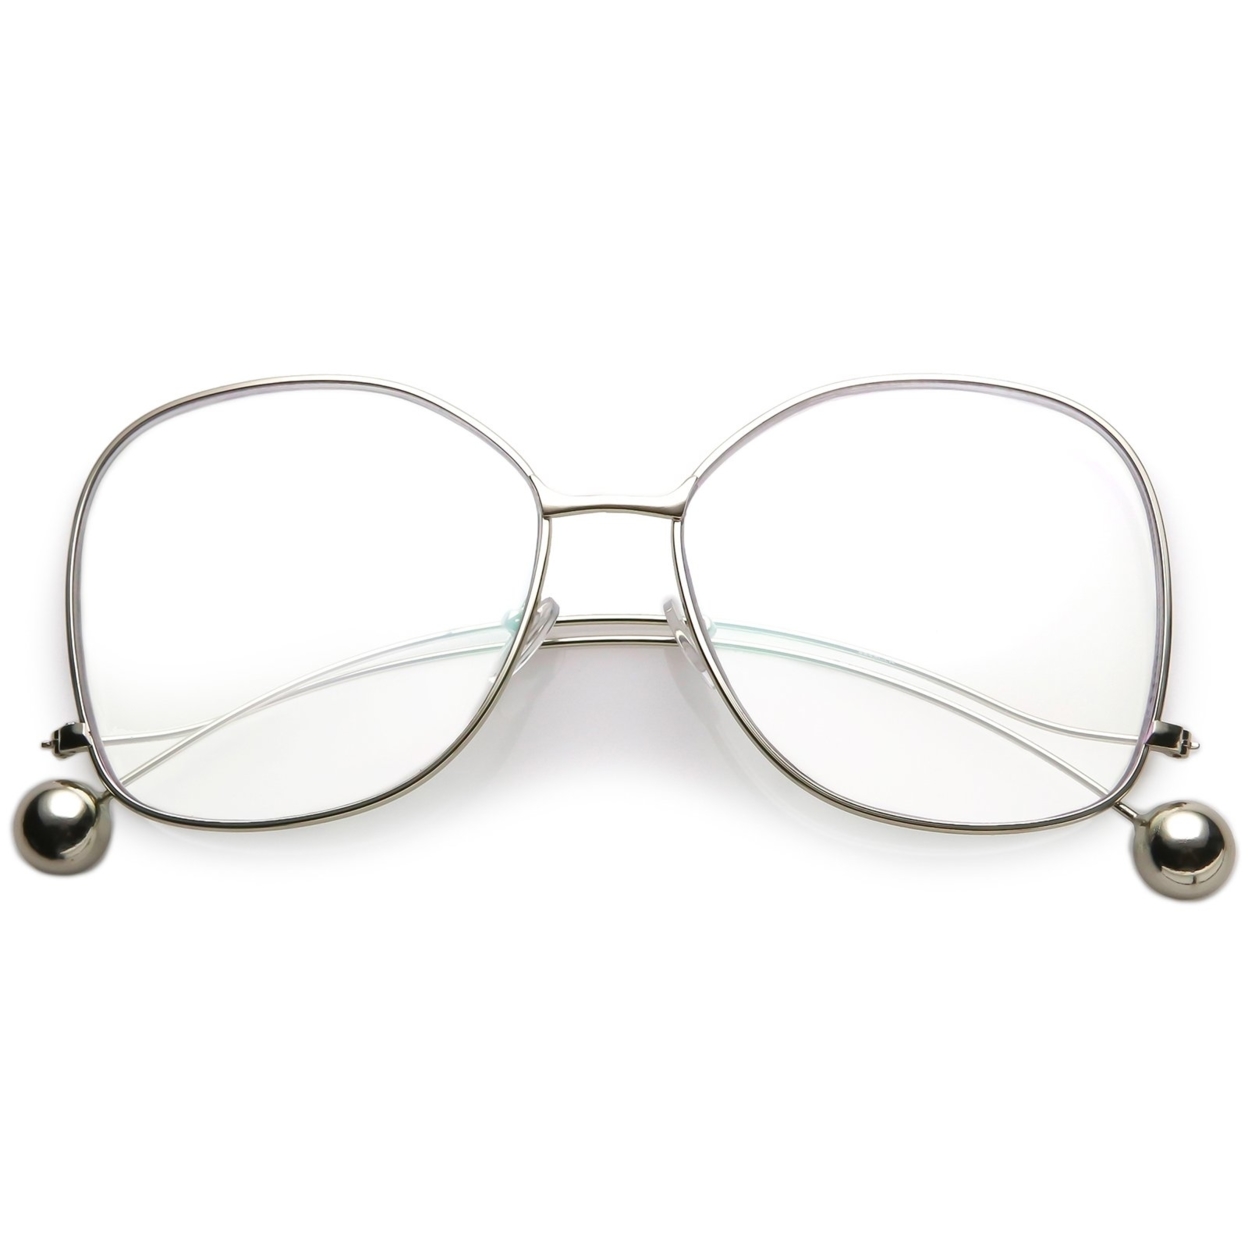 Oversize Butterfly Thin Curved Metal Arms Ball Accents Clear Flat Lens Glasses 63mm - Gold / Clear